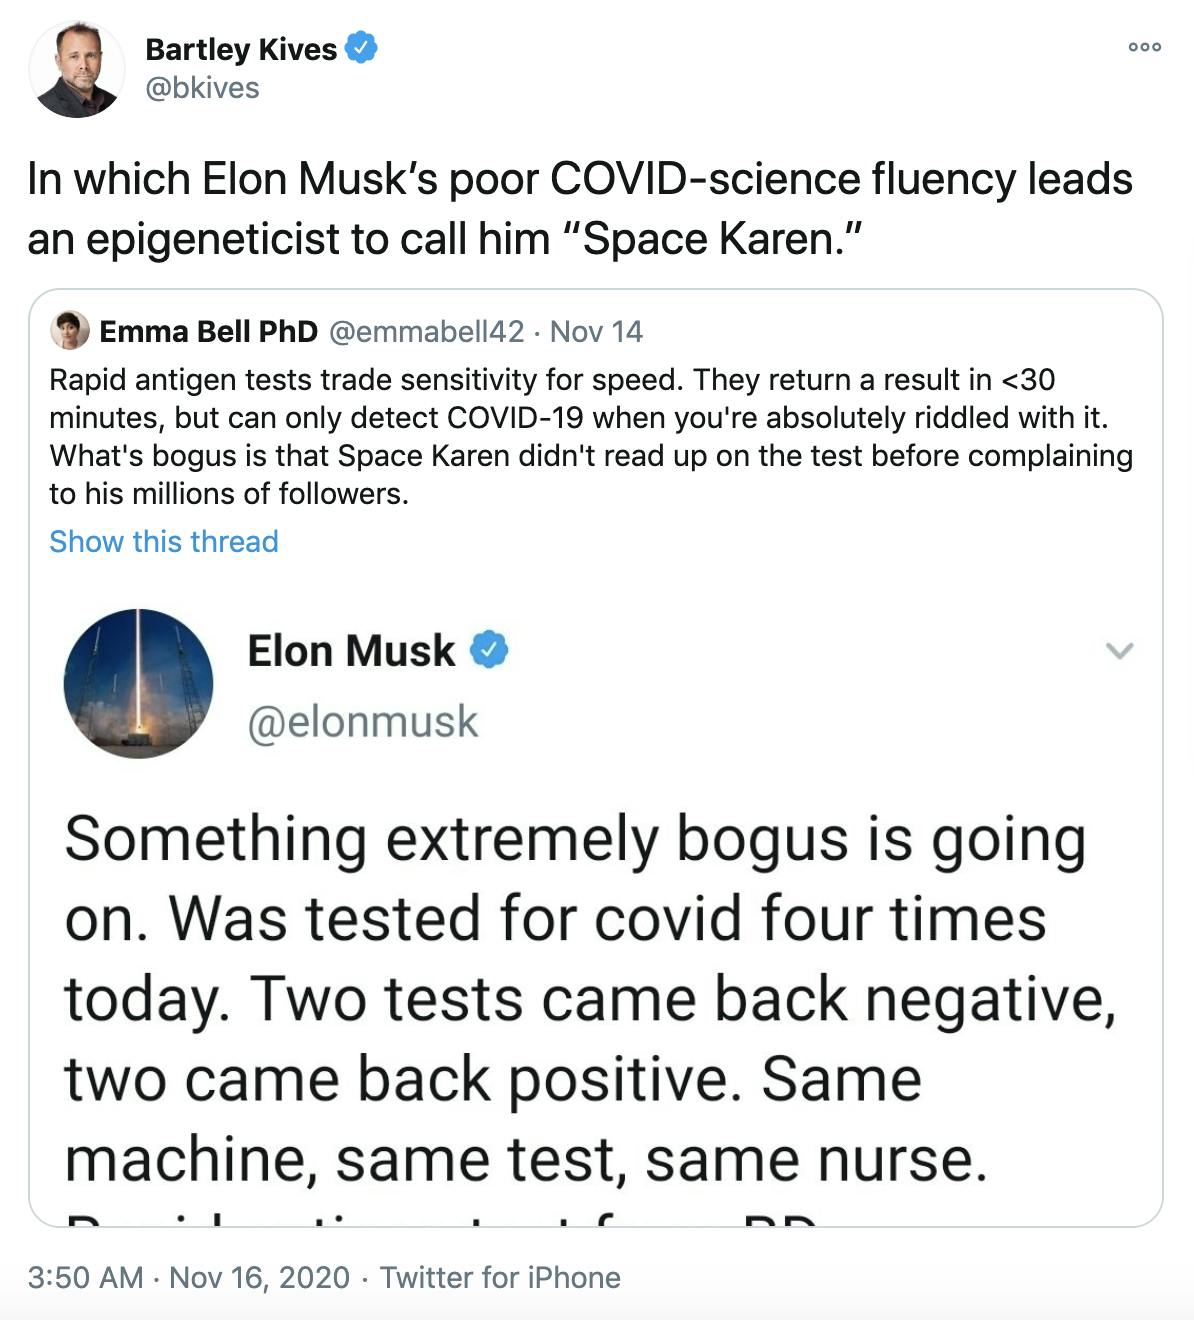 In which Elon Musk’s poor COVID-science fluency leads an epigeneticist to call him “Space Karen.”